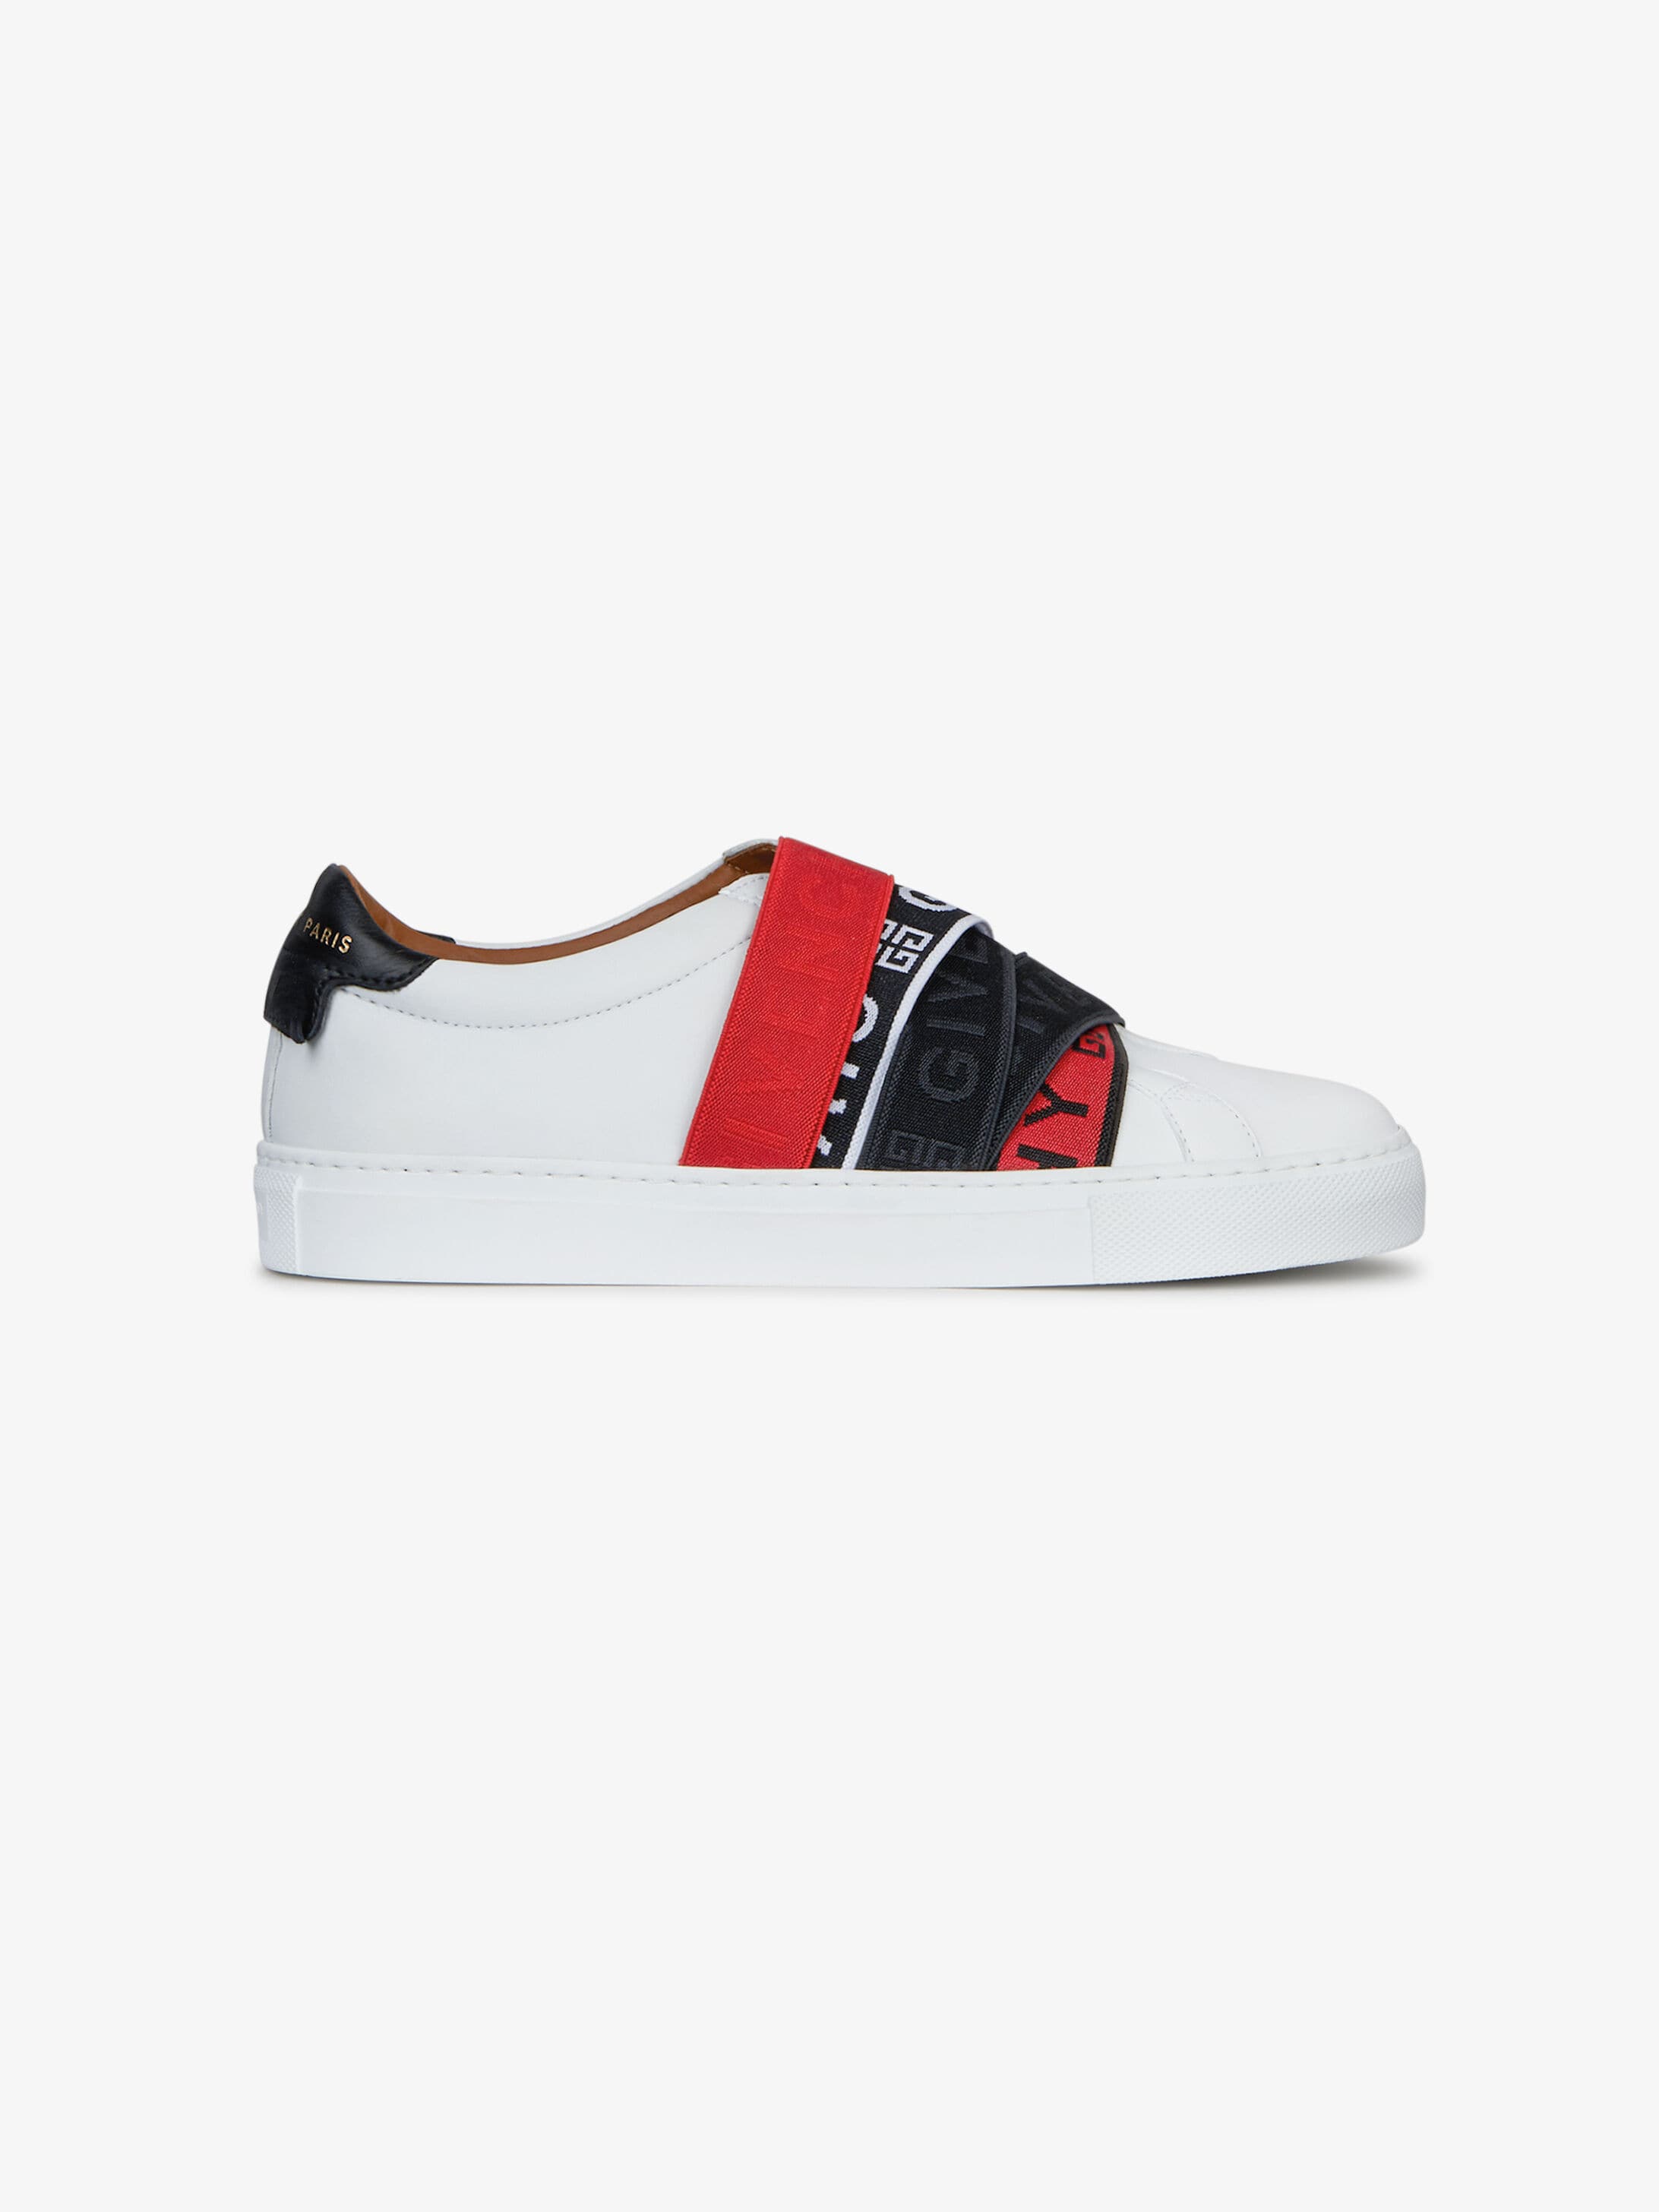 Givenchy Women S Shoes Size Chart